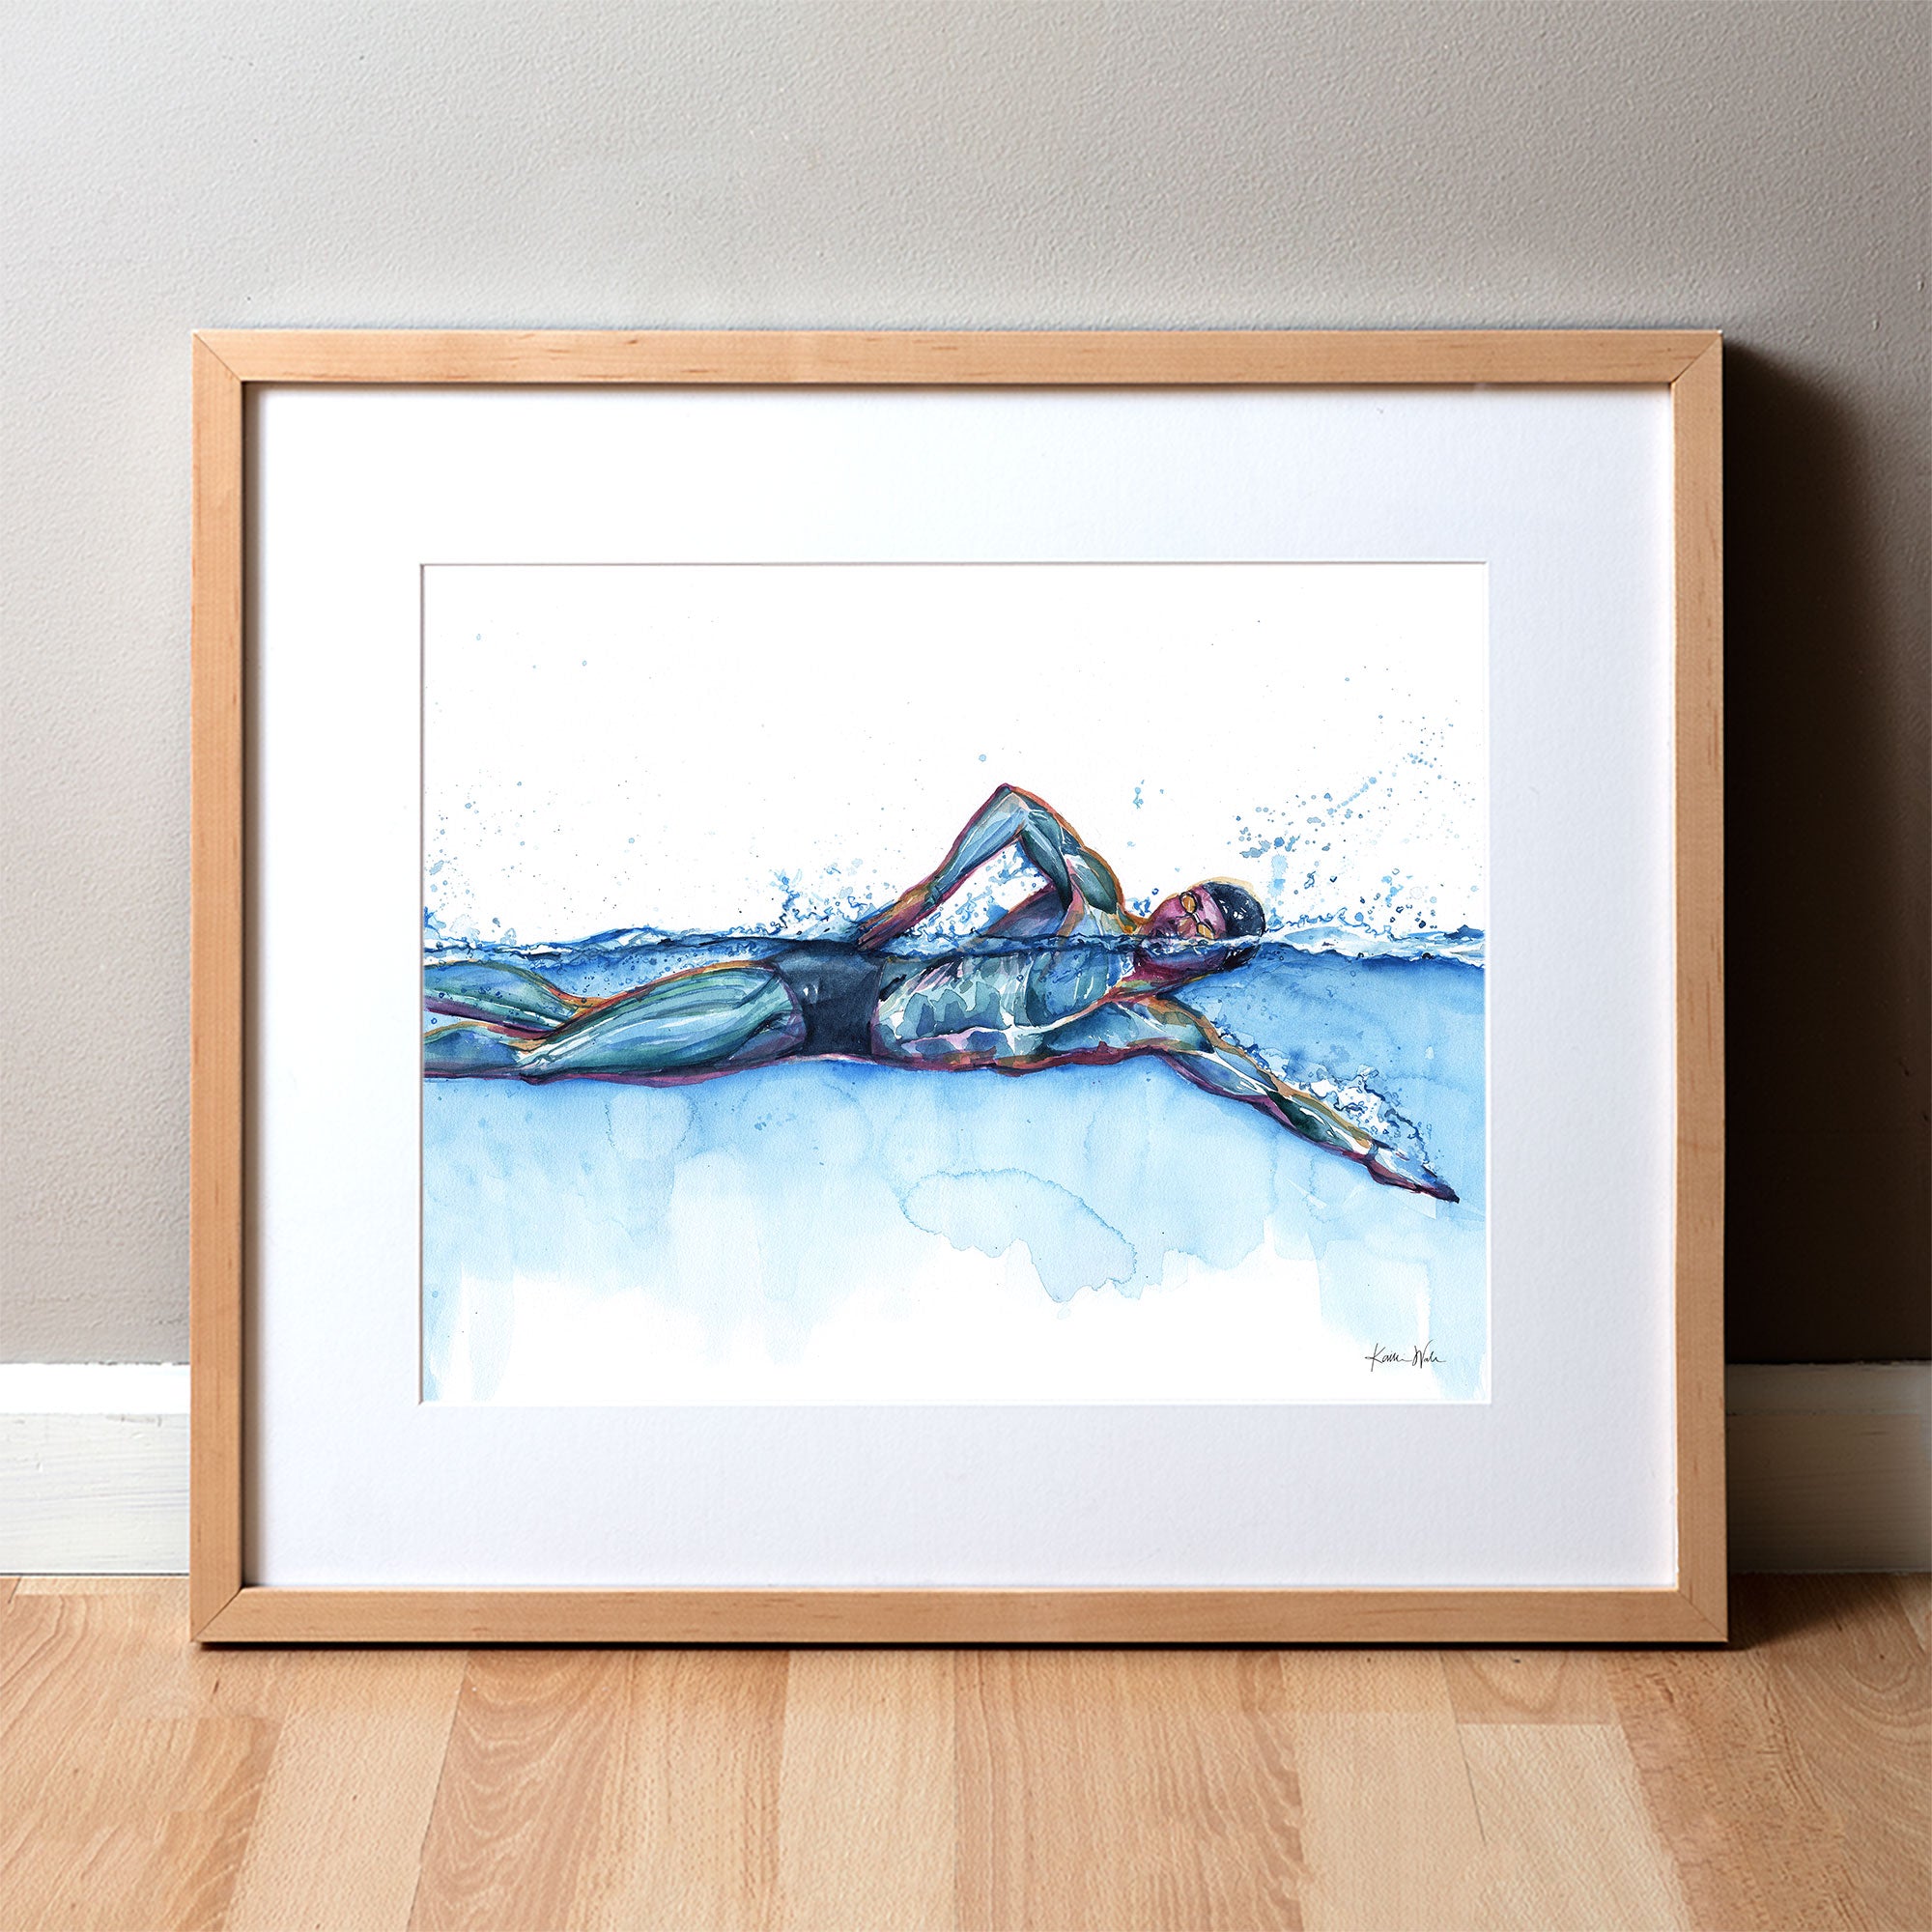 Framed watercolor painting of a swimmer in mid stroke showing the swimmer’s muscular anatomy.